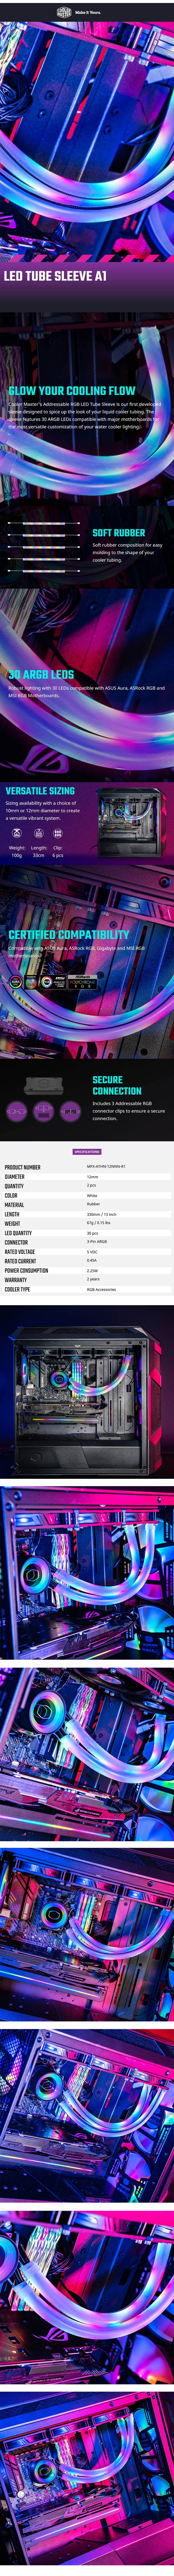 A large marketing image providing additional information about the product Cooler Master Addressable RGB LED Tube Sleeve A1 - Additional alt info not provided